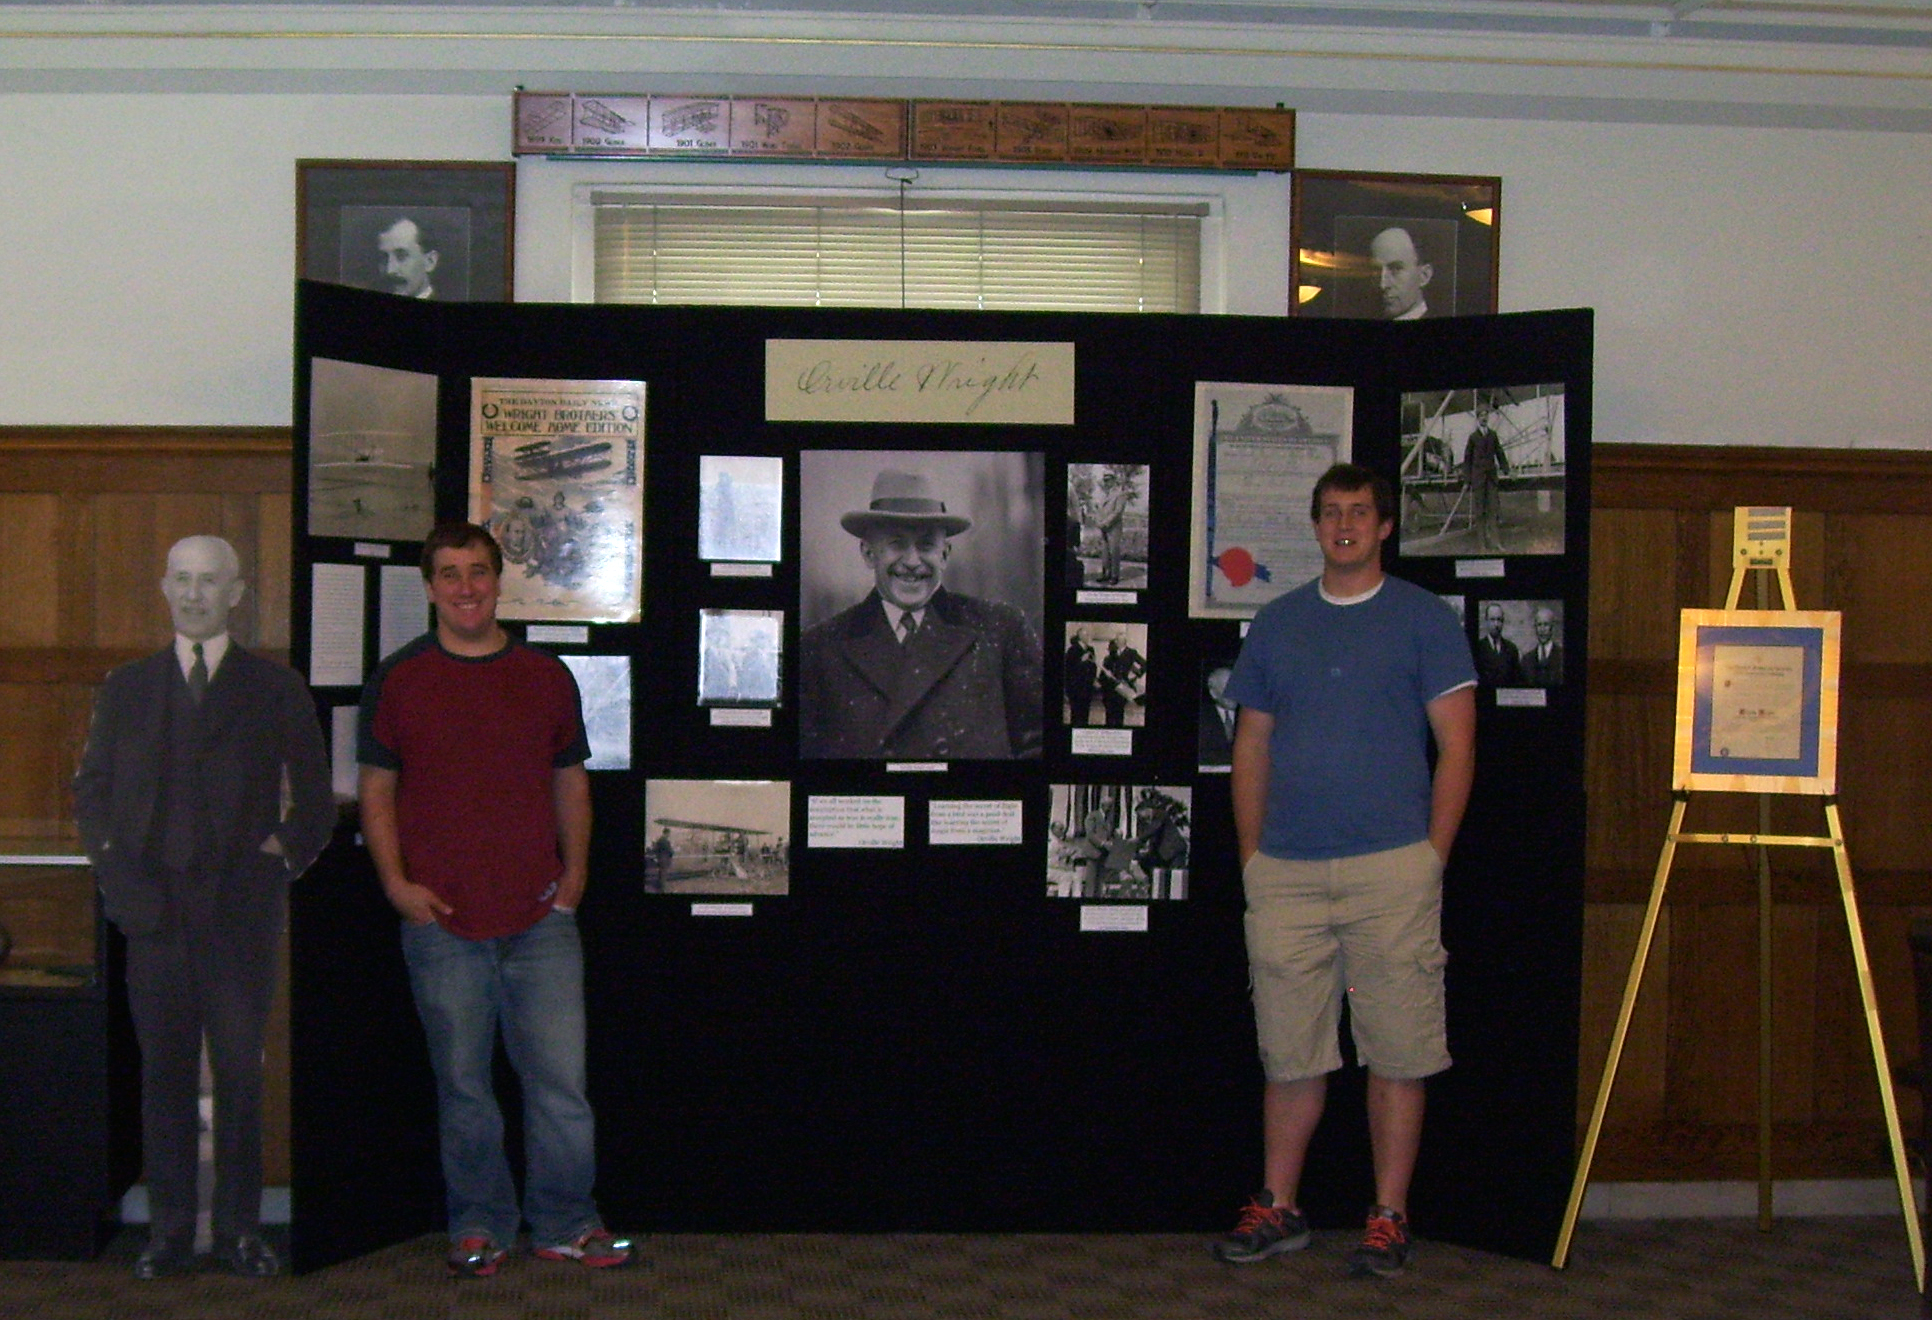 Adam (left) and Jordan with the Orville Wright portion of their exhibit